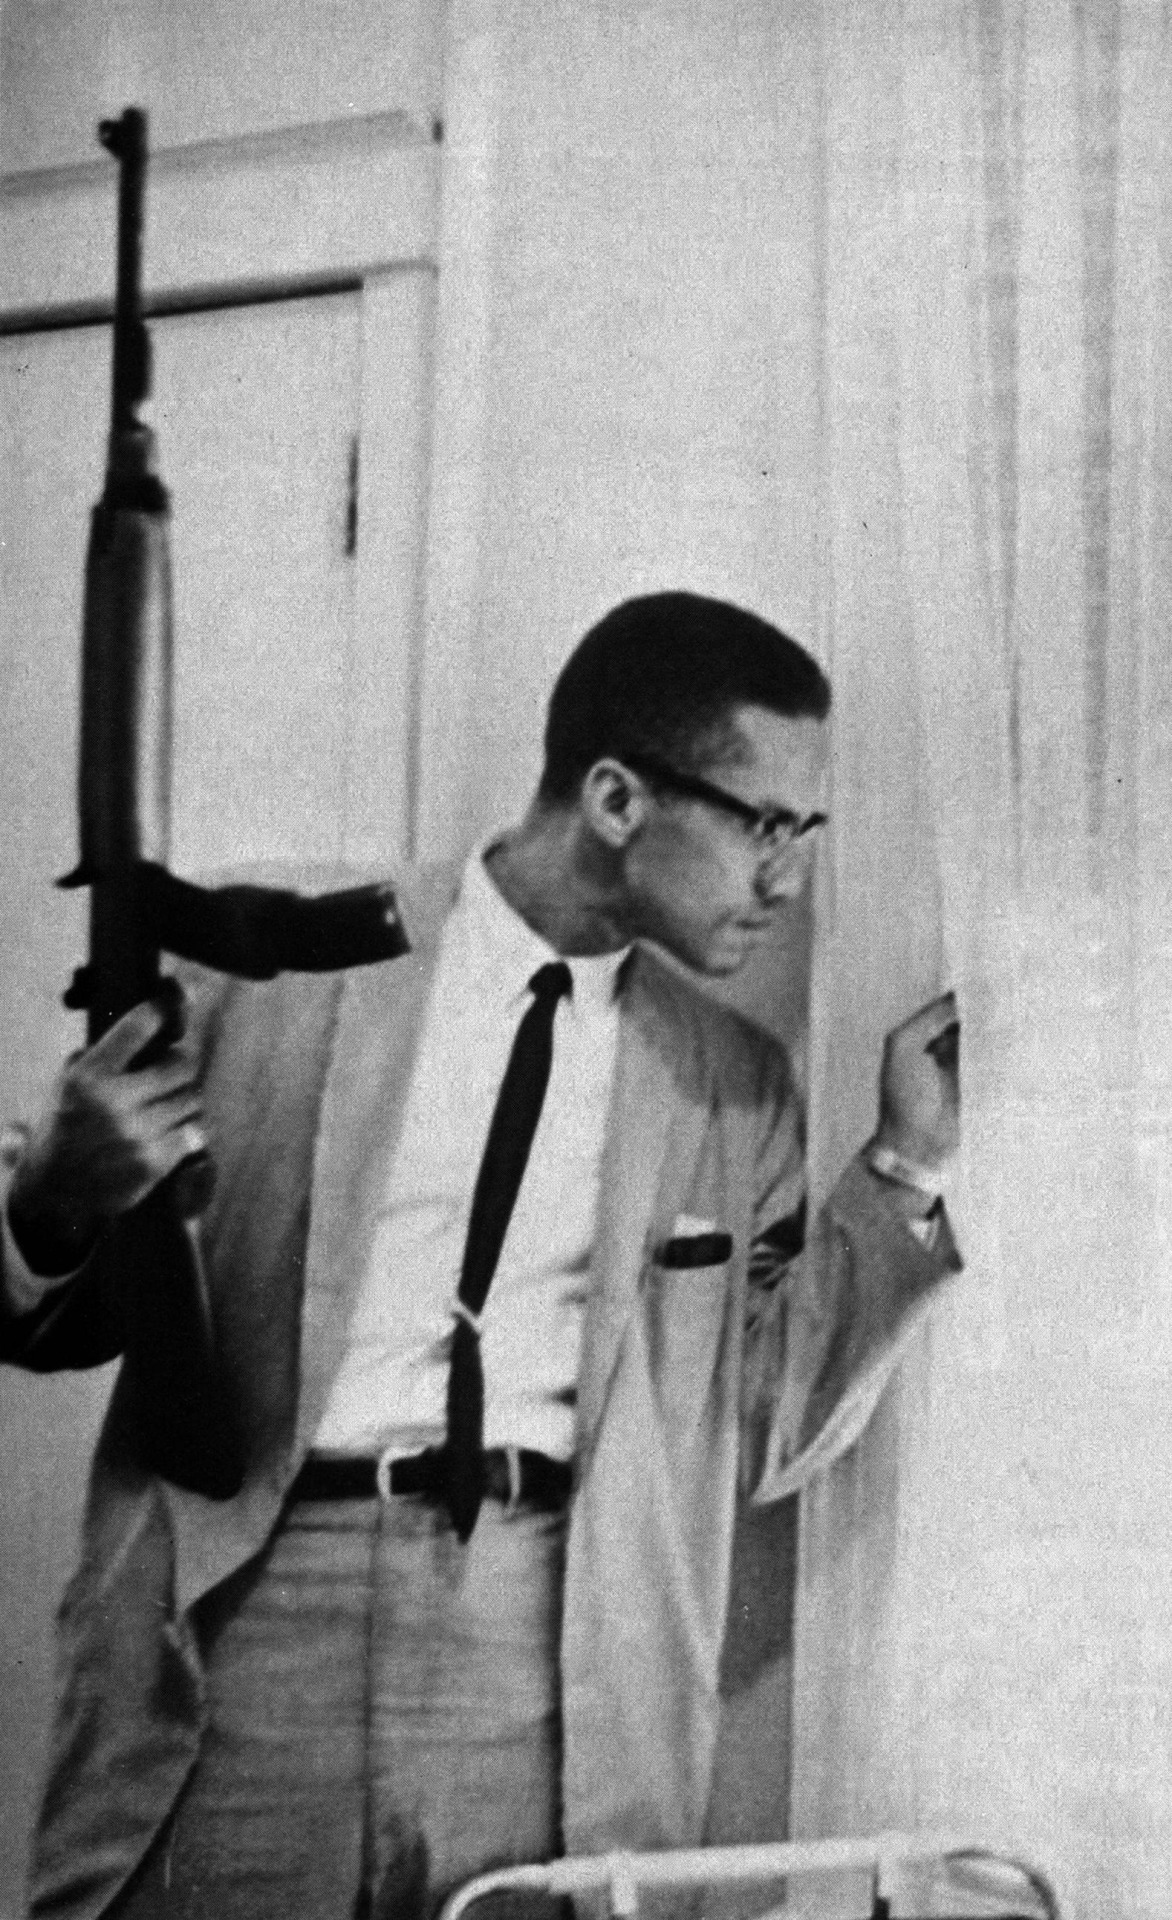 American born Minister and Civil Rights activist, Malcolm X peeks out his window with an A-1 Carbine  rifle amidst death threats and violence he constantly received.